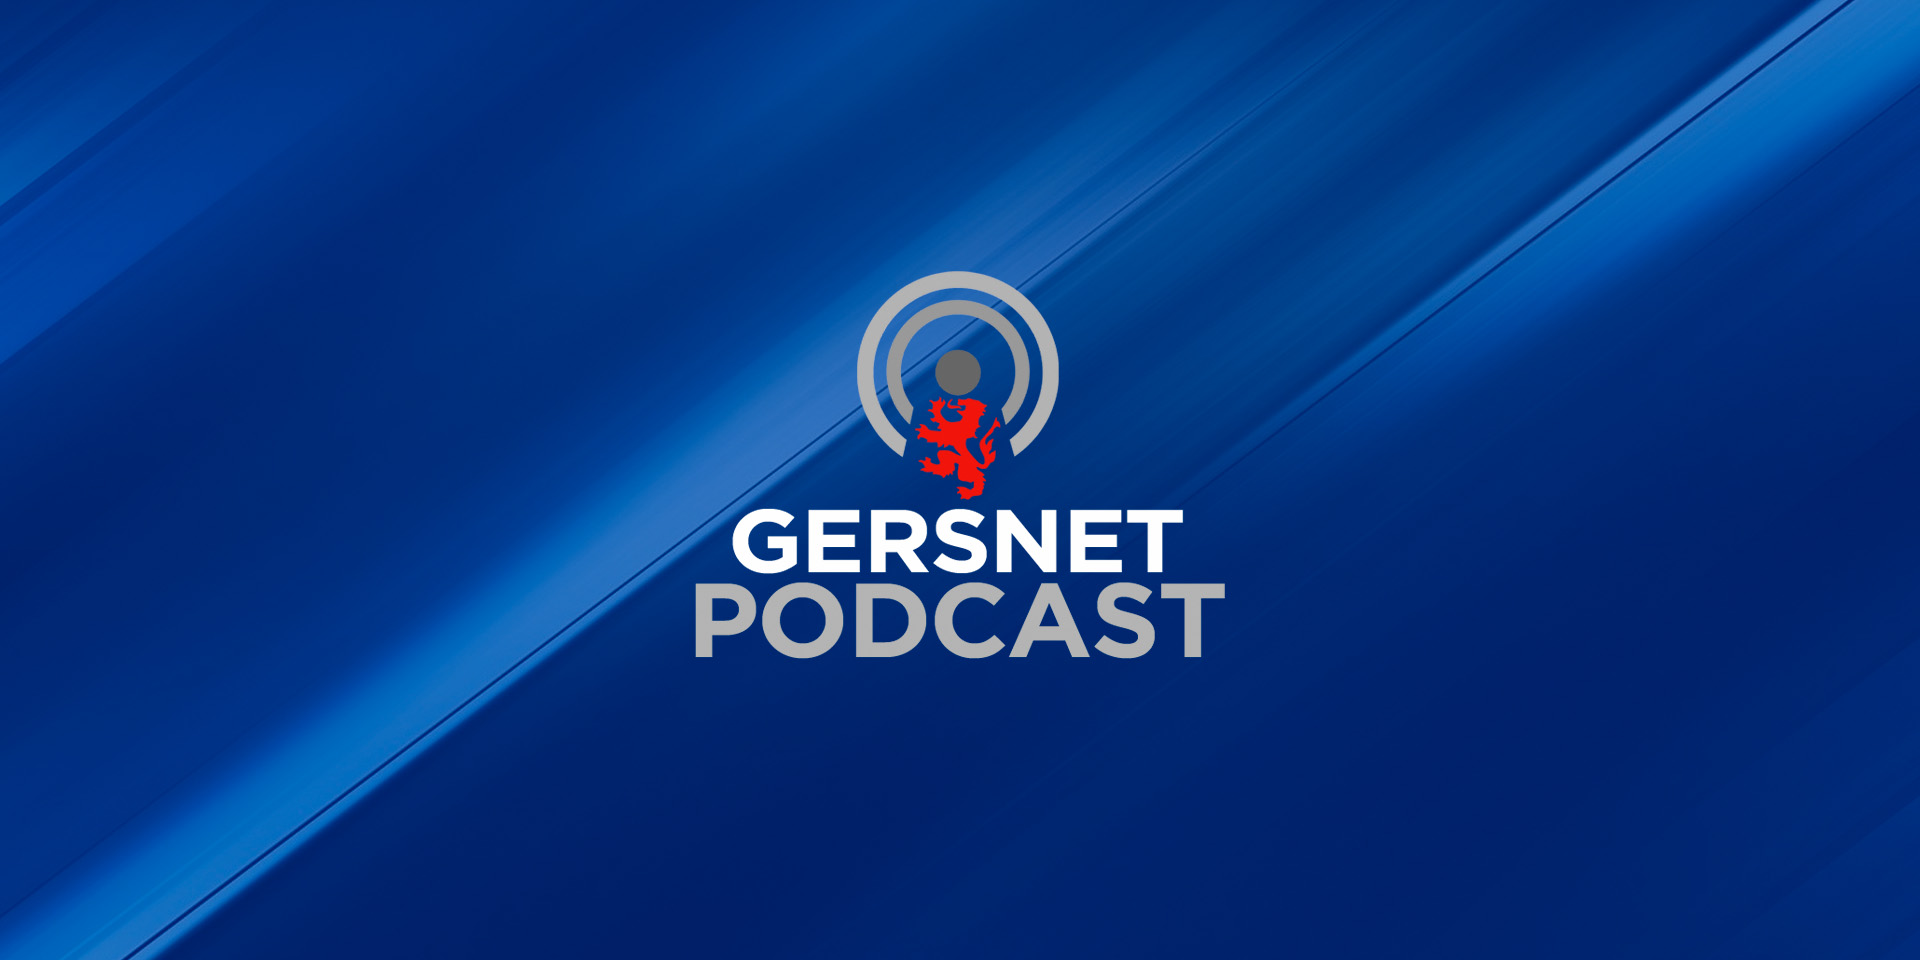 Gersnet Podcast 206 - Motherwell Preview